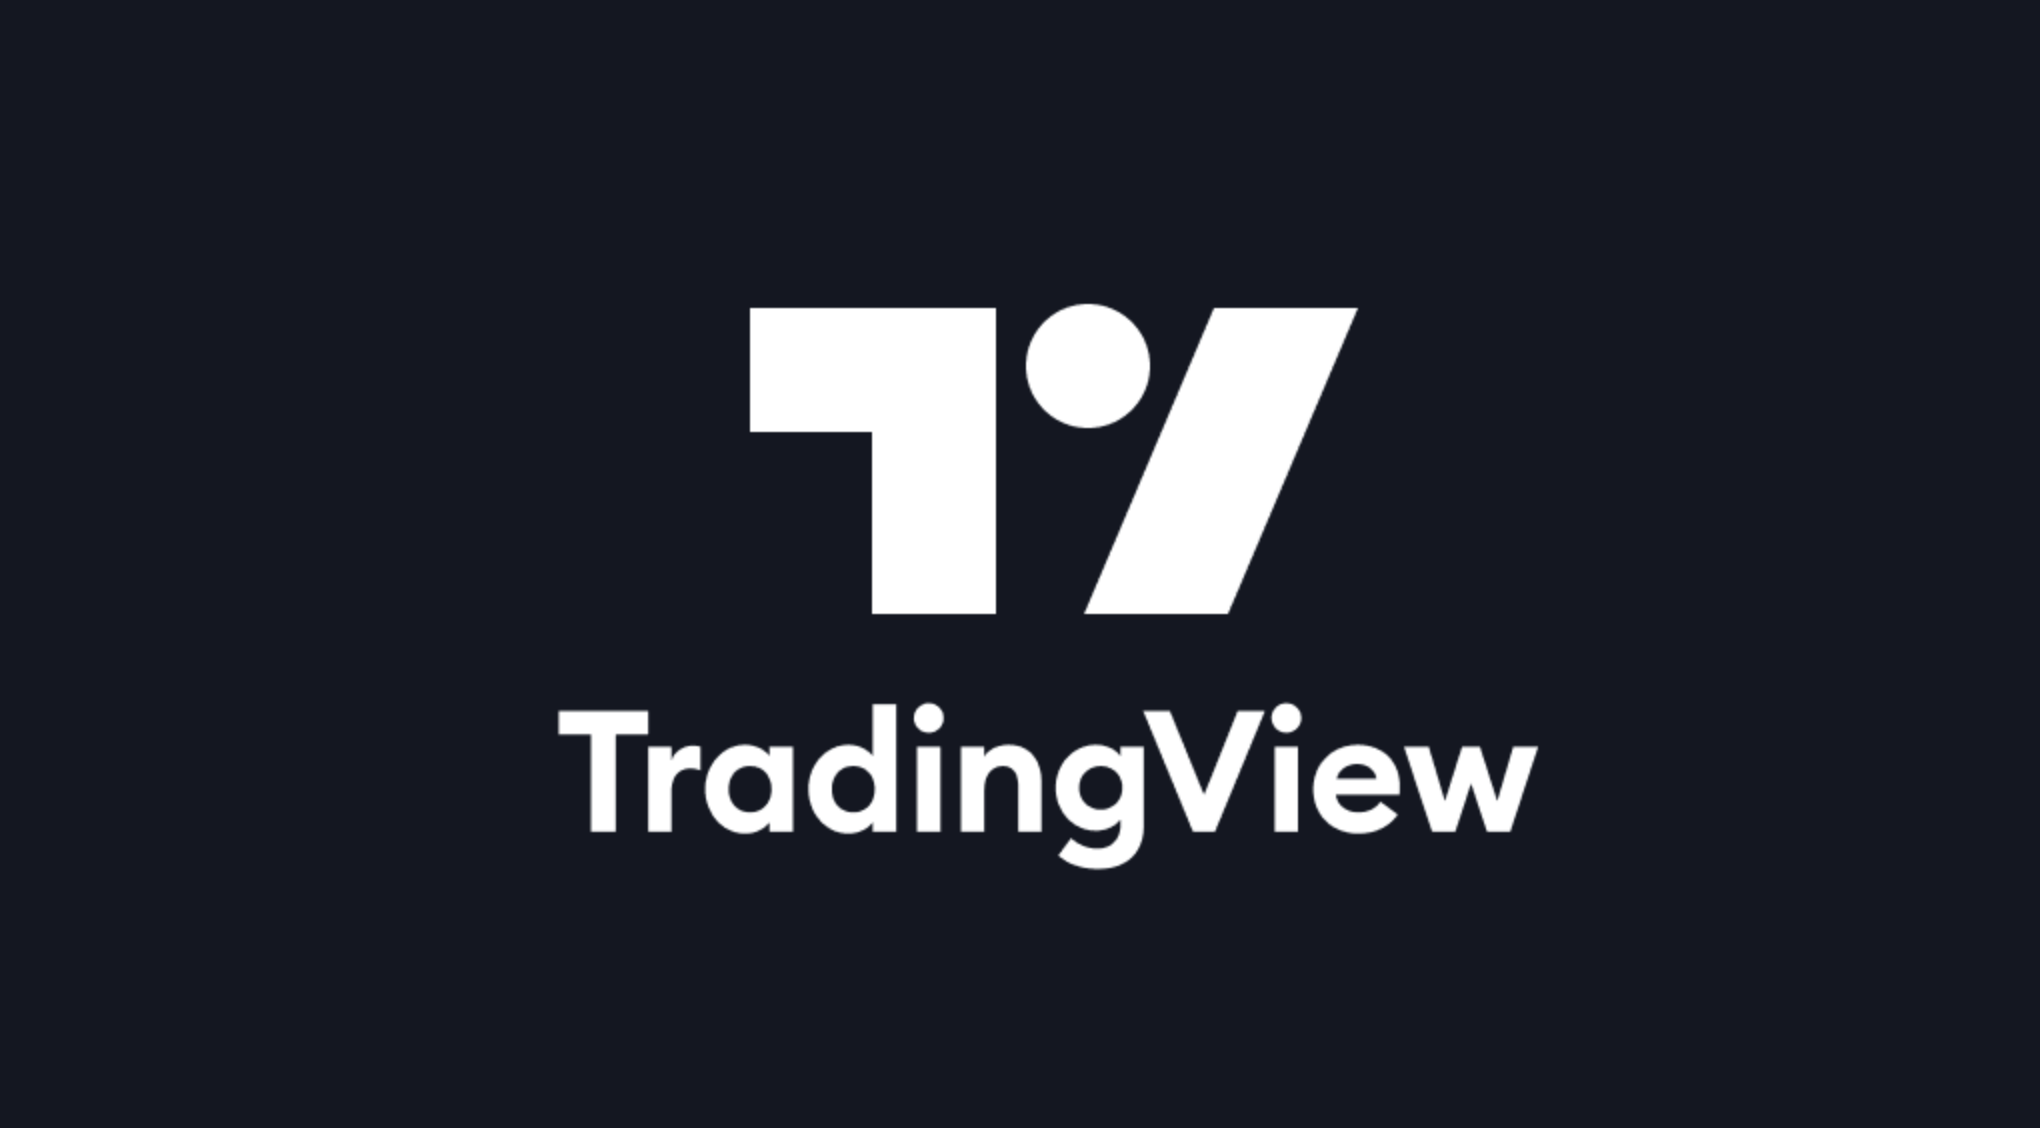 TradingView Review: Is This Platform Worth It In 2022?